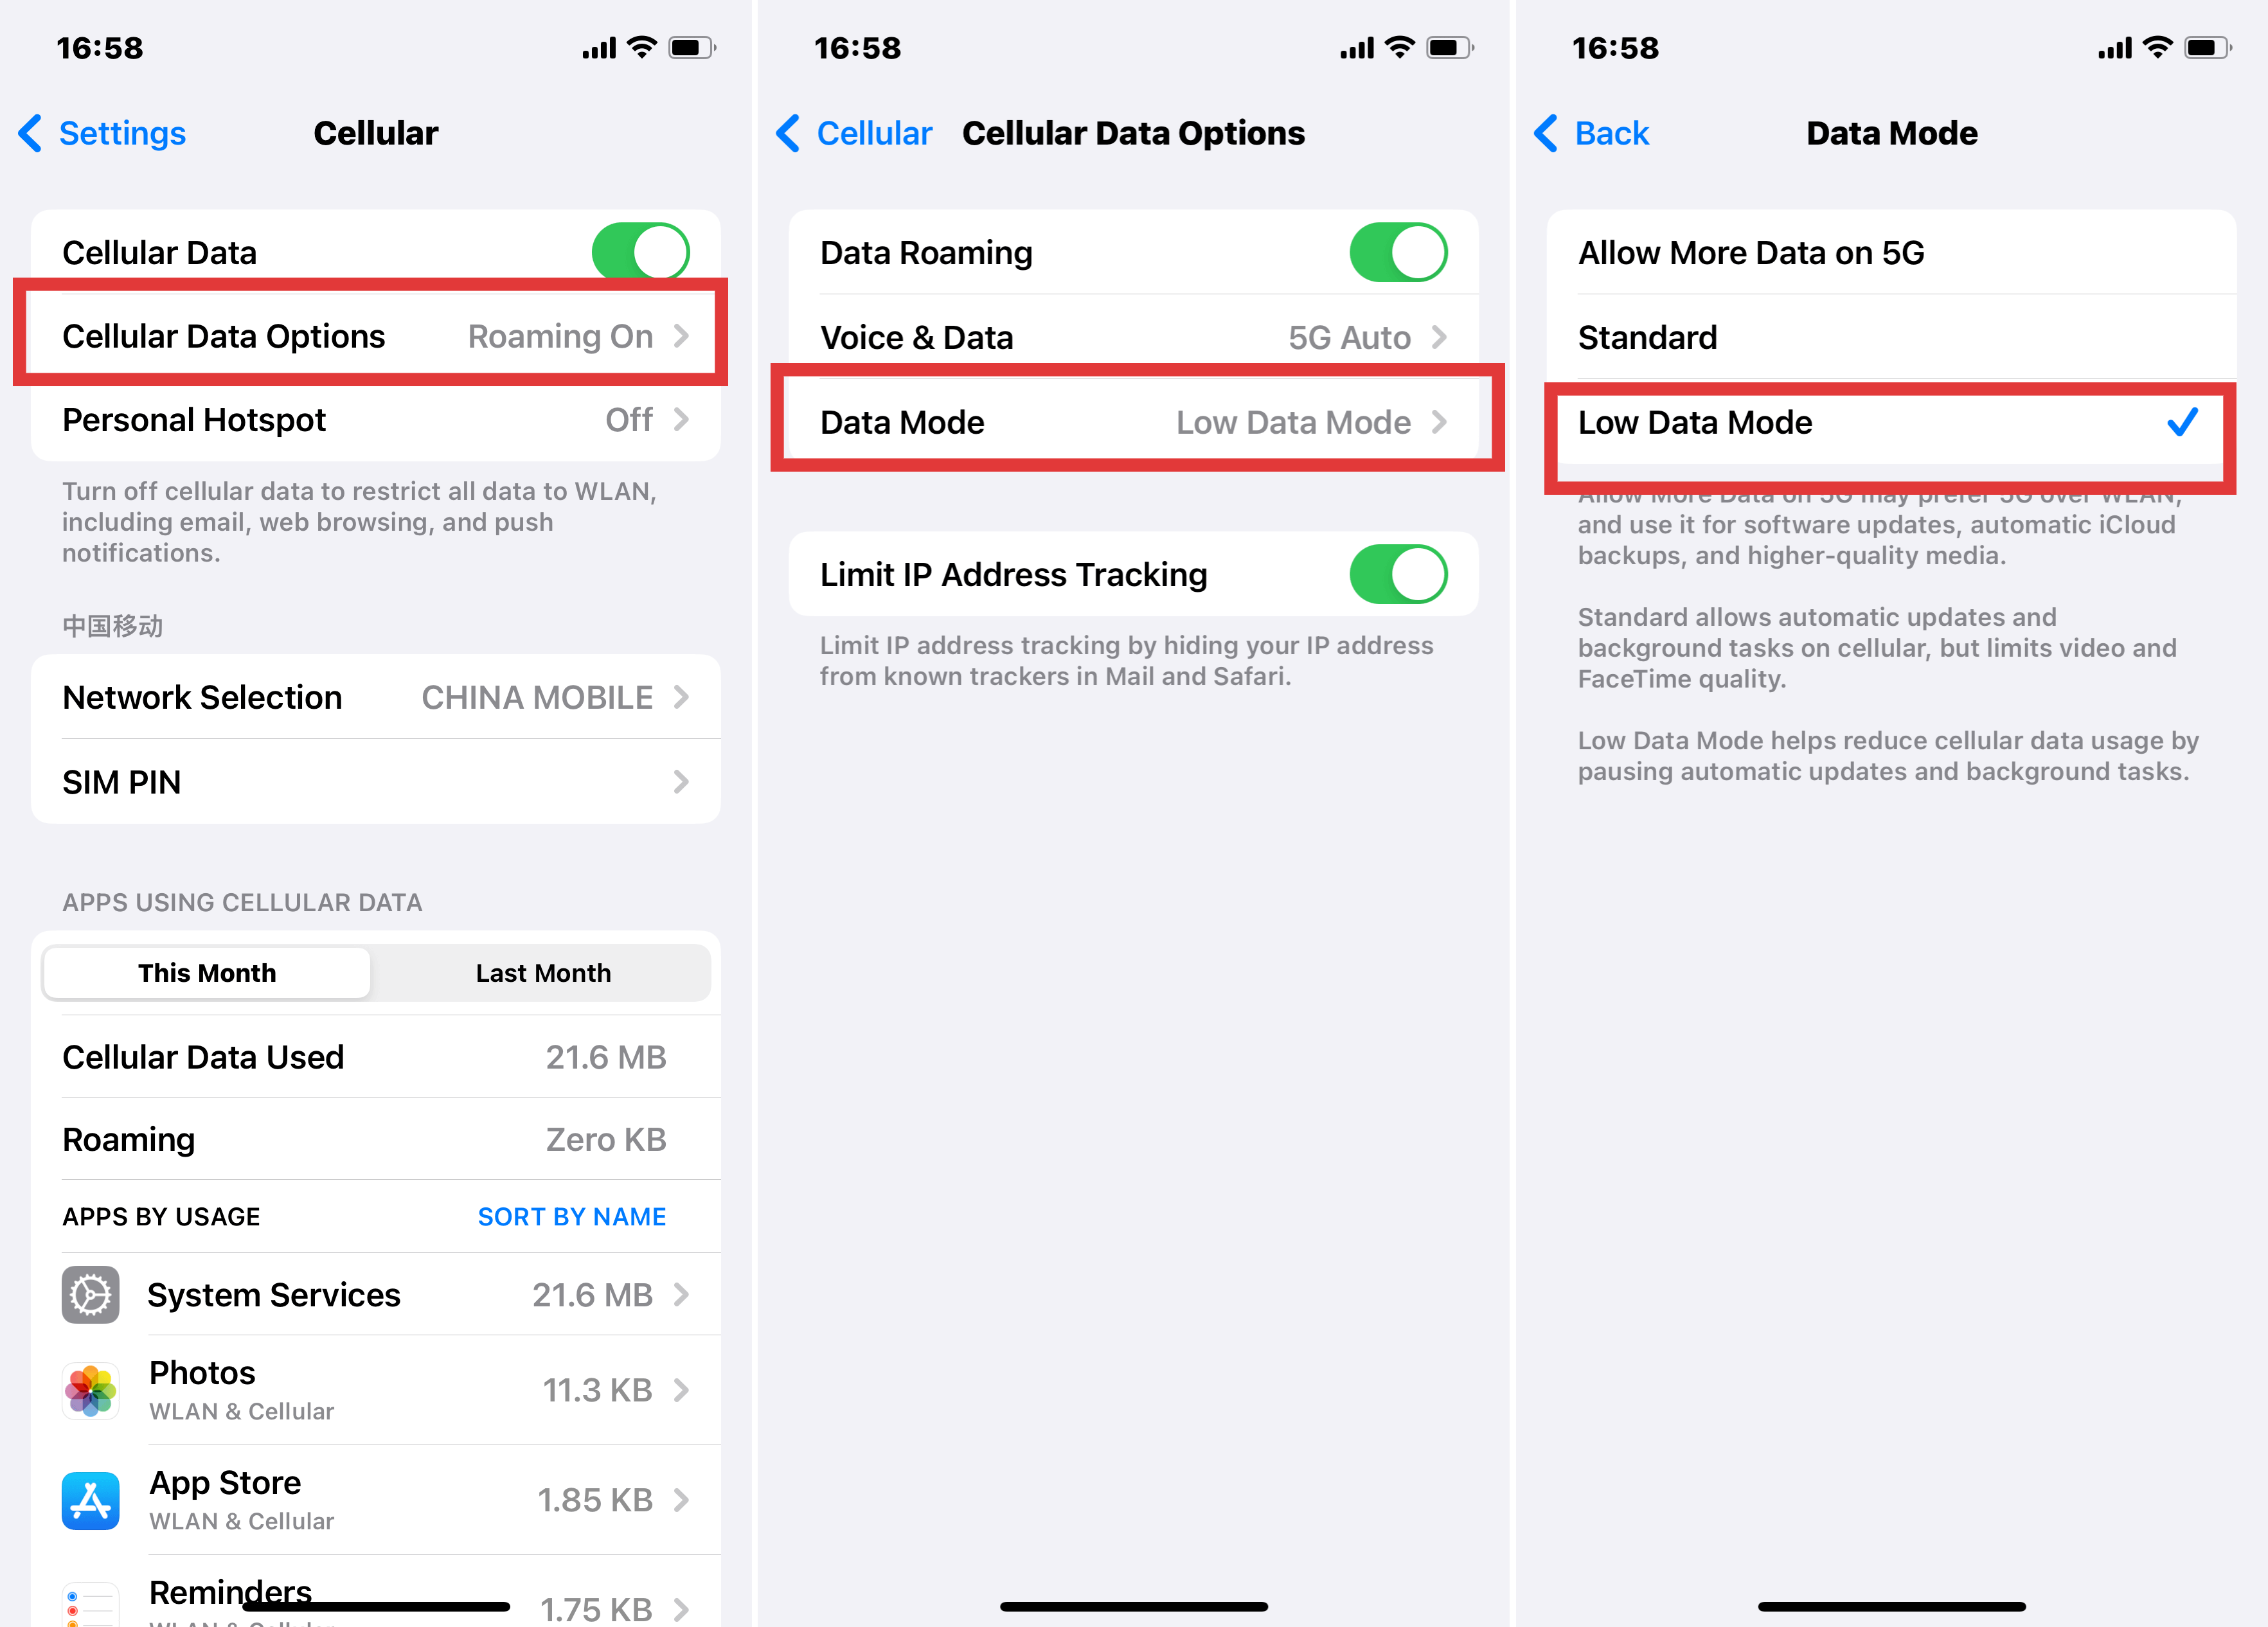 Enable Low Data Mode on iPhone Settings